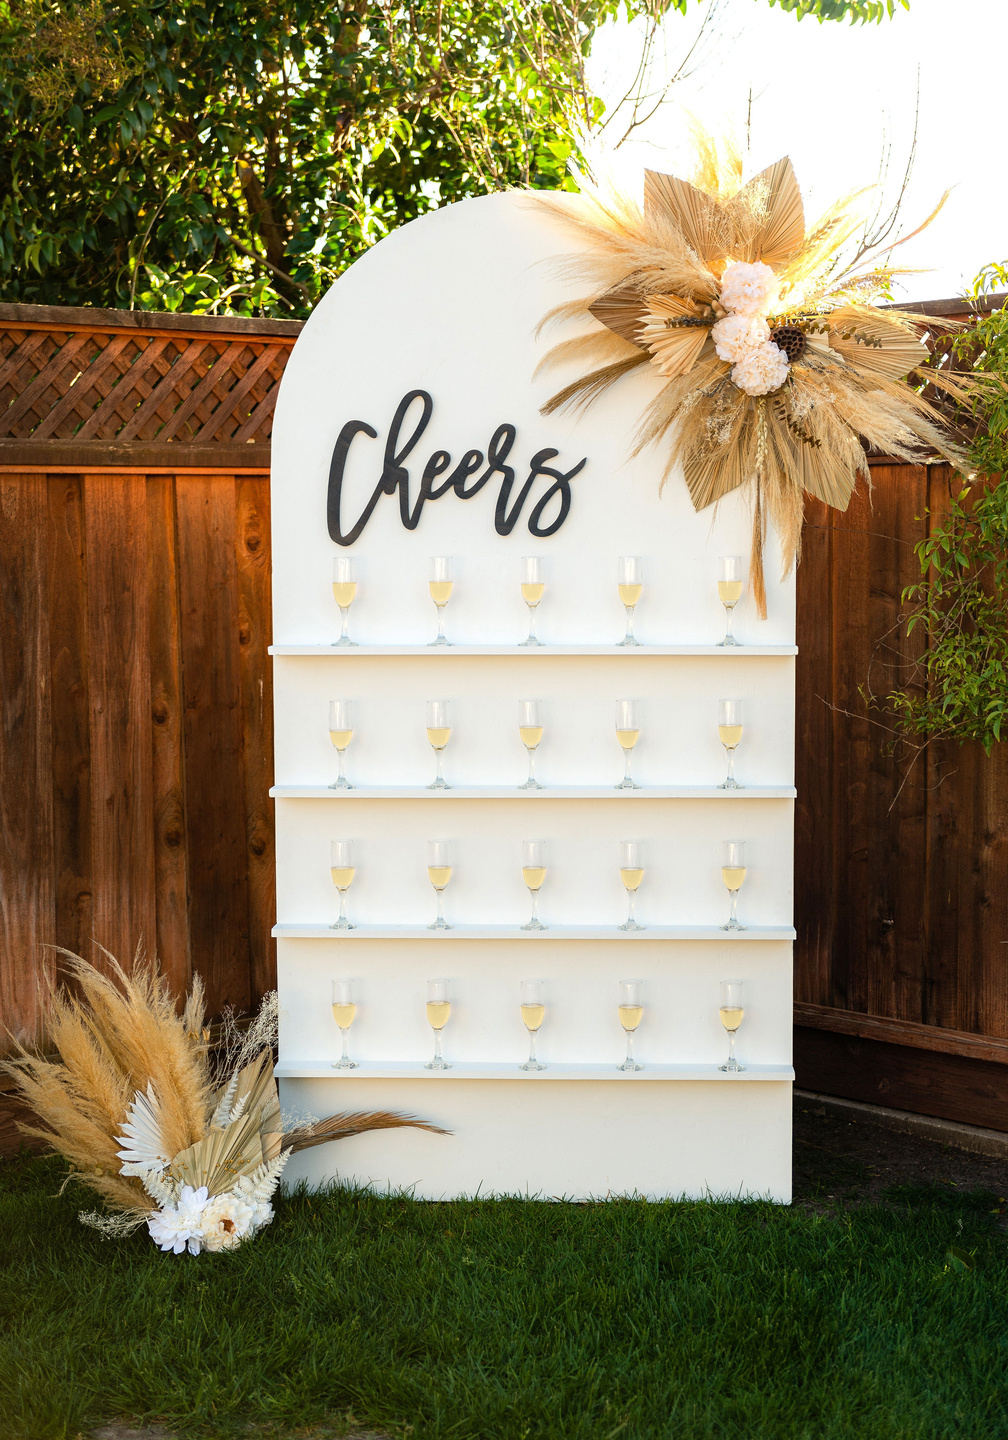 rental display wall that can be used as a champagne wall, dessert wall, gift wall, party favor wall